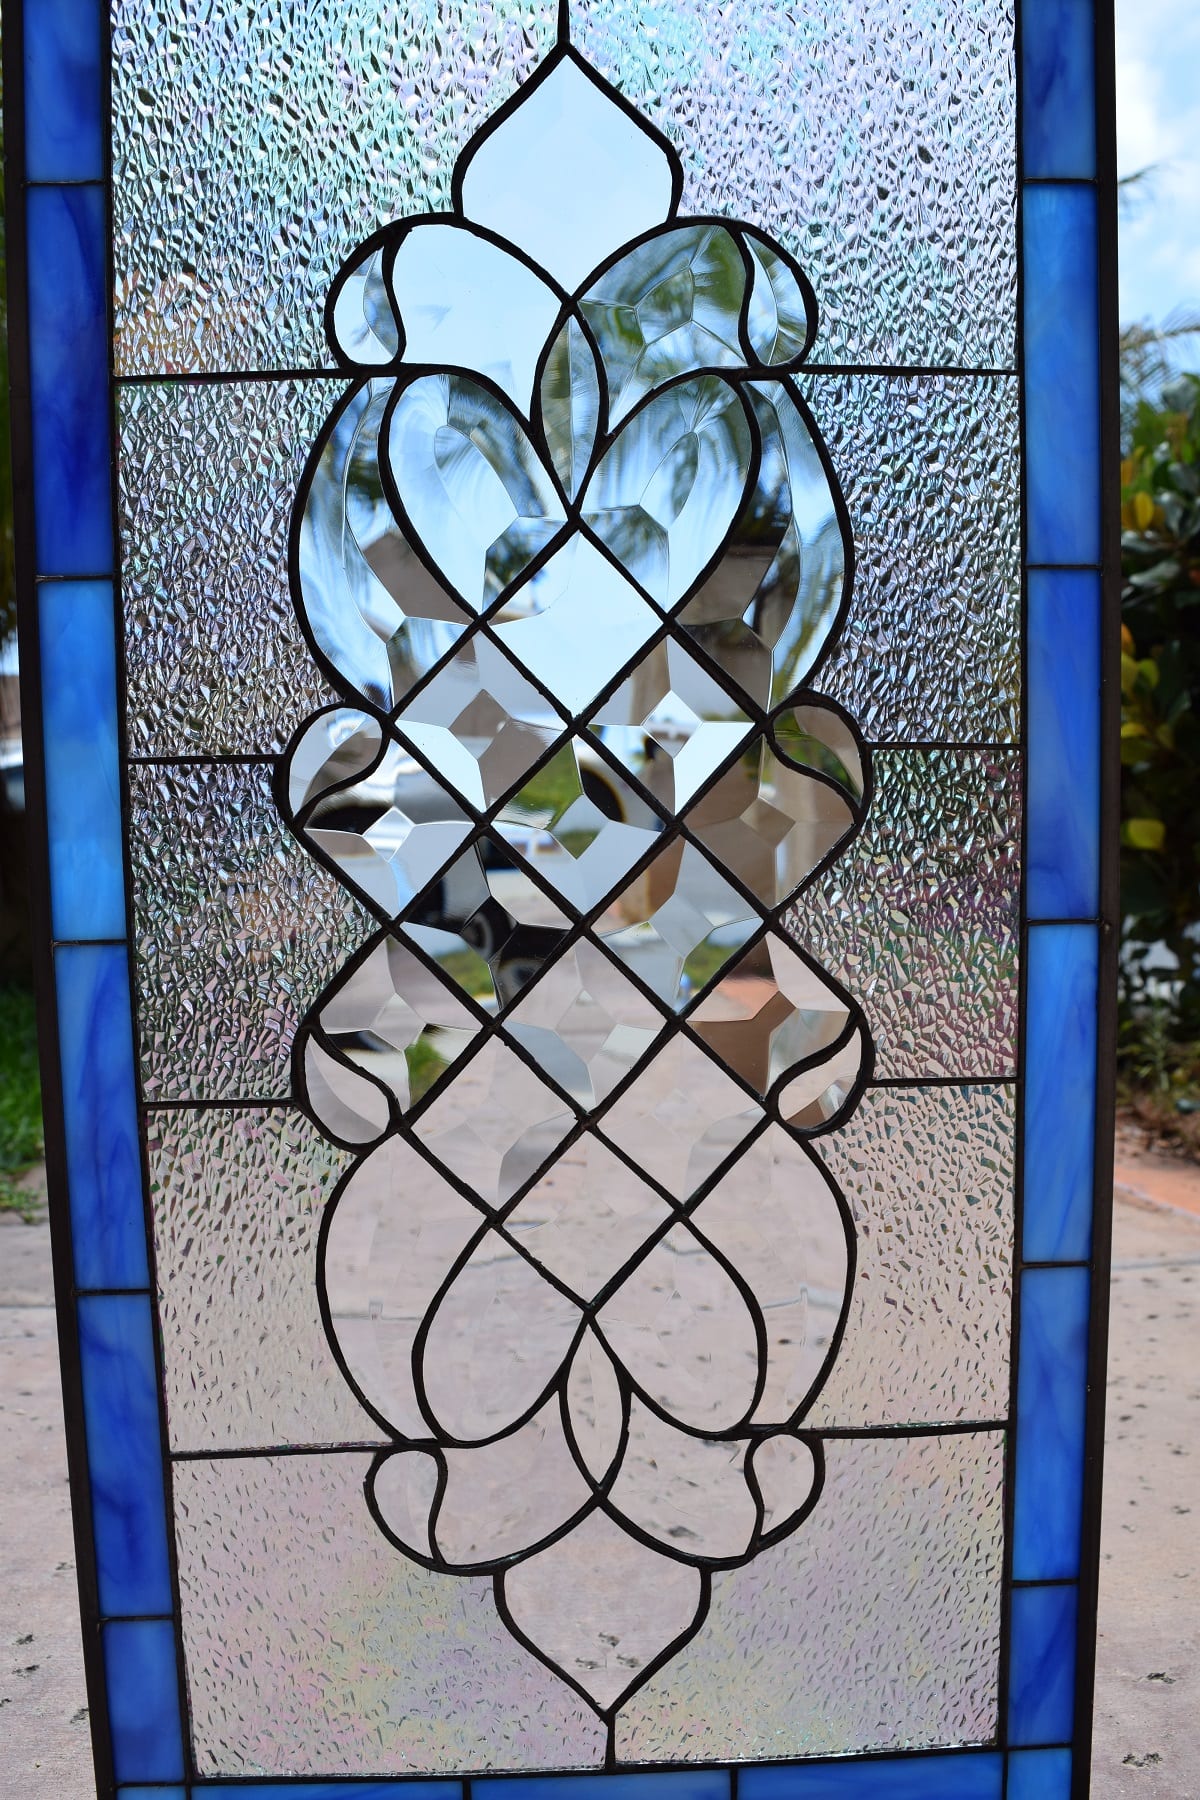 The "Laguna" Clear Beveled & Iridescent Ice Crystal Leaded Stained